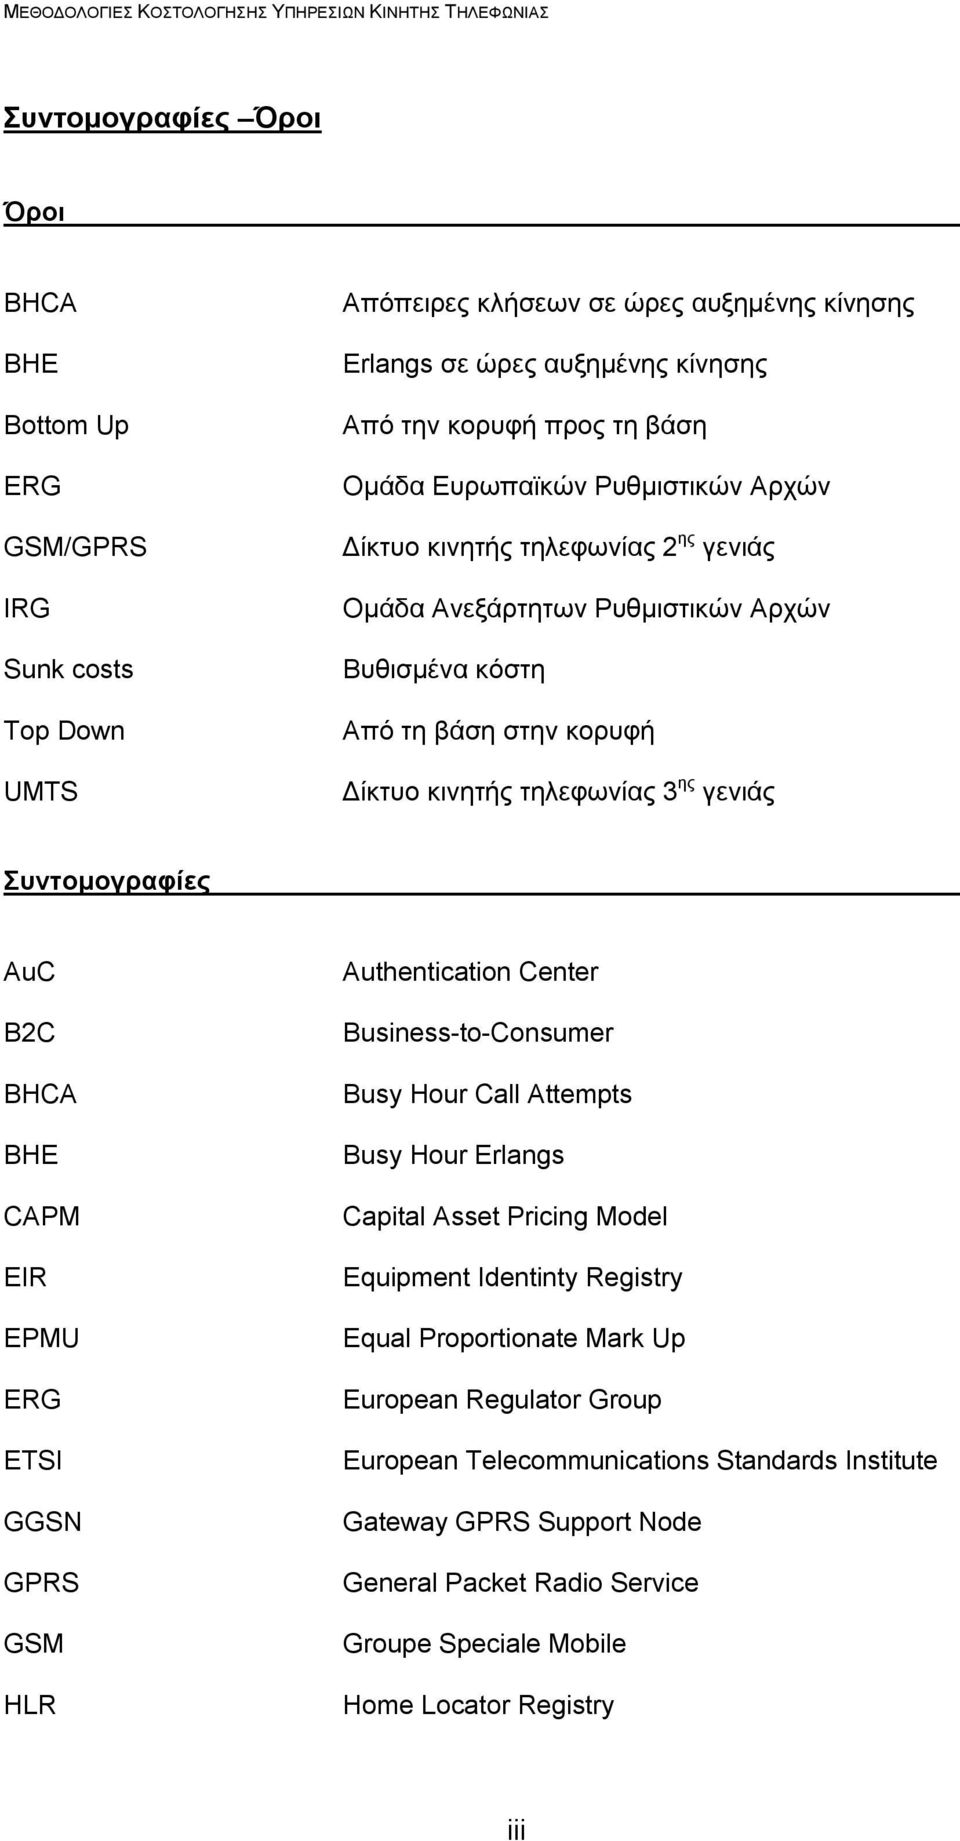 B2C BHCA BHE CAPM EIR EPMU ERG ETSI GGSN GPRS GSM HLR Authentication Center Business-to-Consumer Busy Hour Call Attempts Busy Hour Erlangs Capital Asset Pricing Model Equipment Identinty Registry